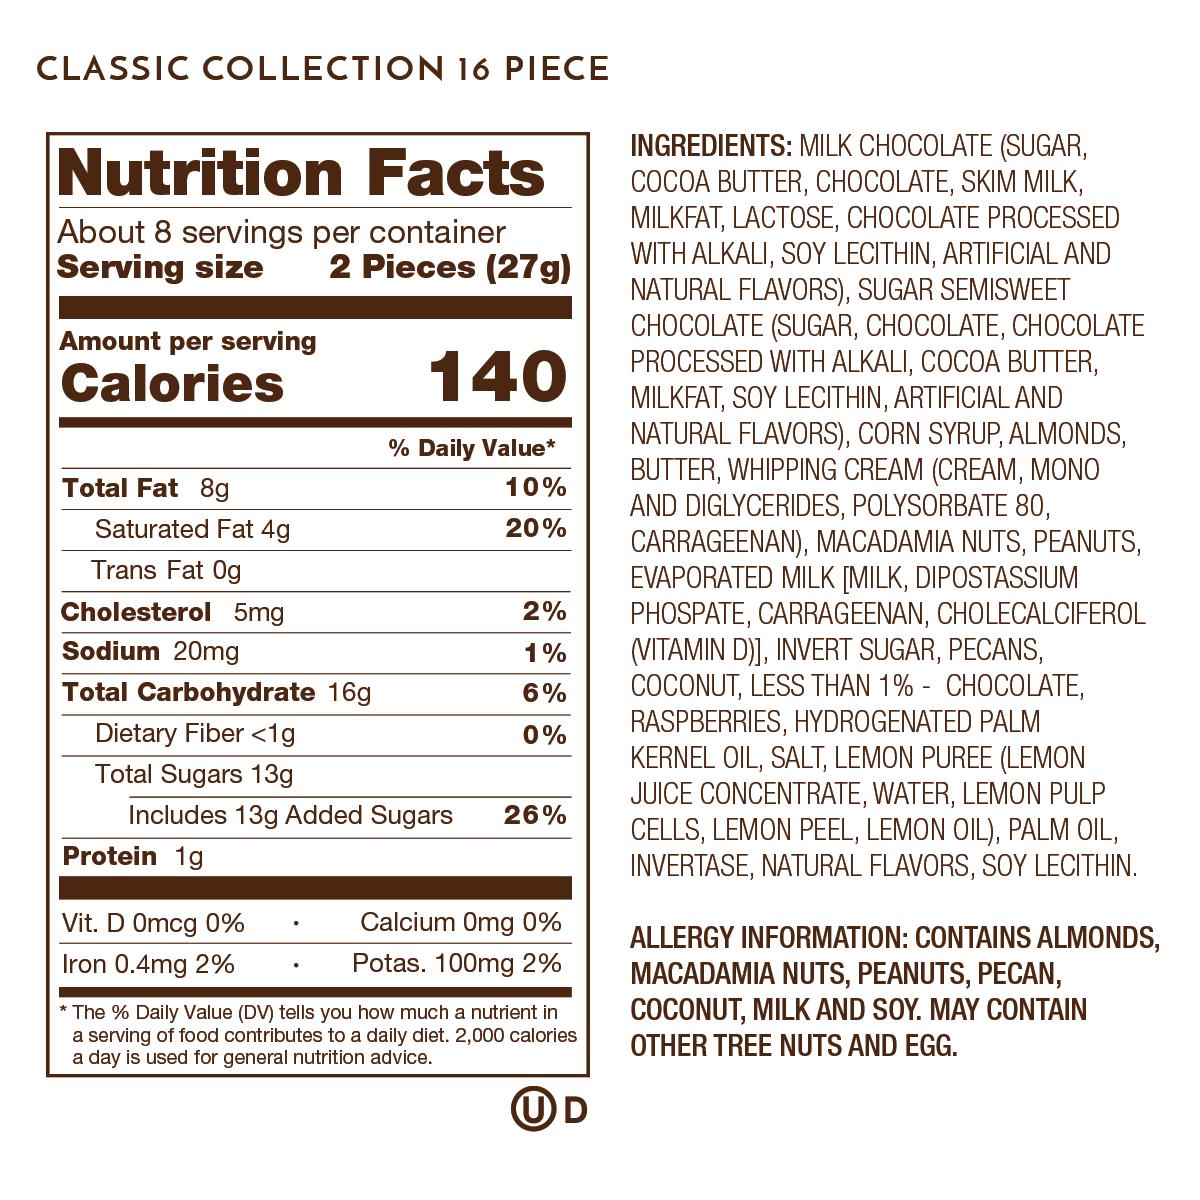 Nutrition Facts, Allergy and Ingredients Label on Classic Collection 16 Piece.